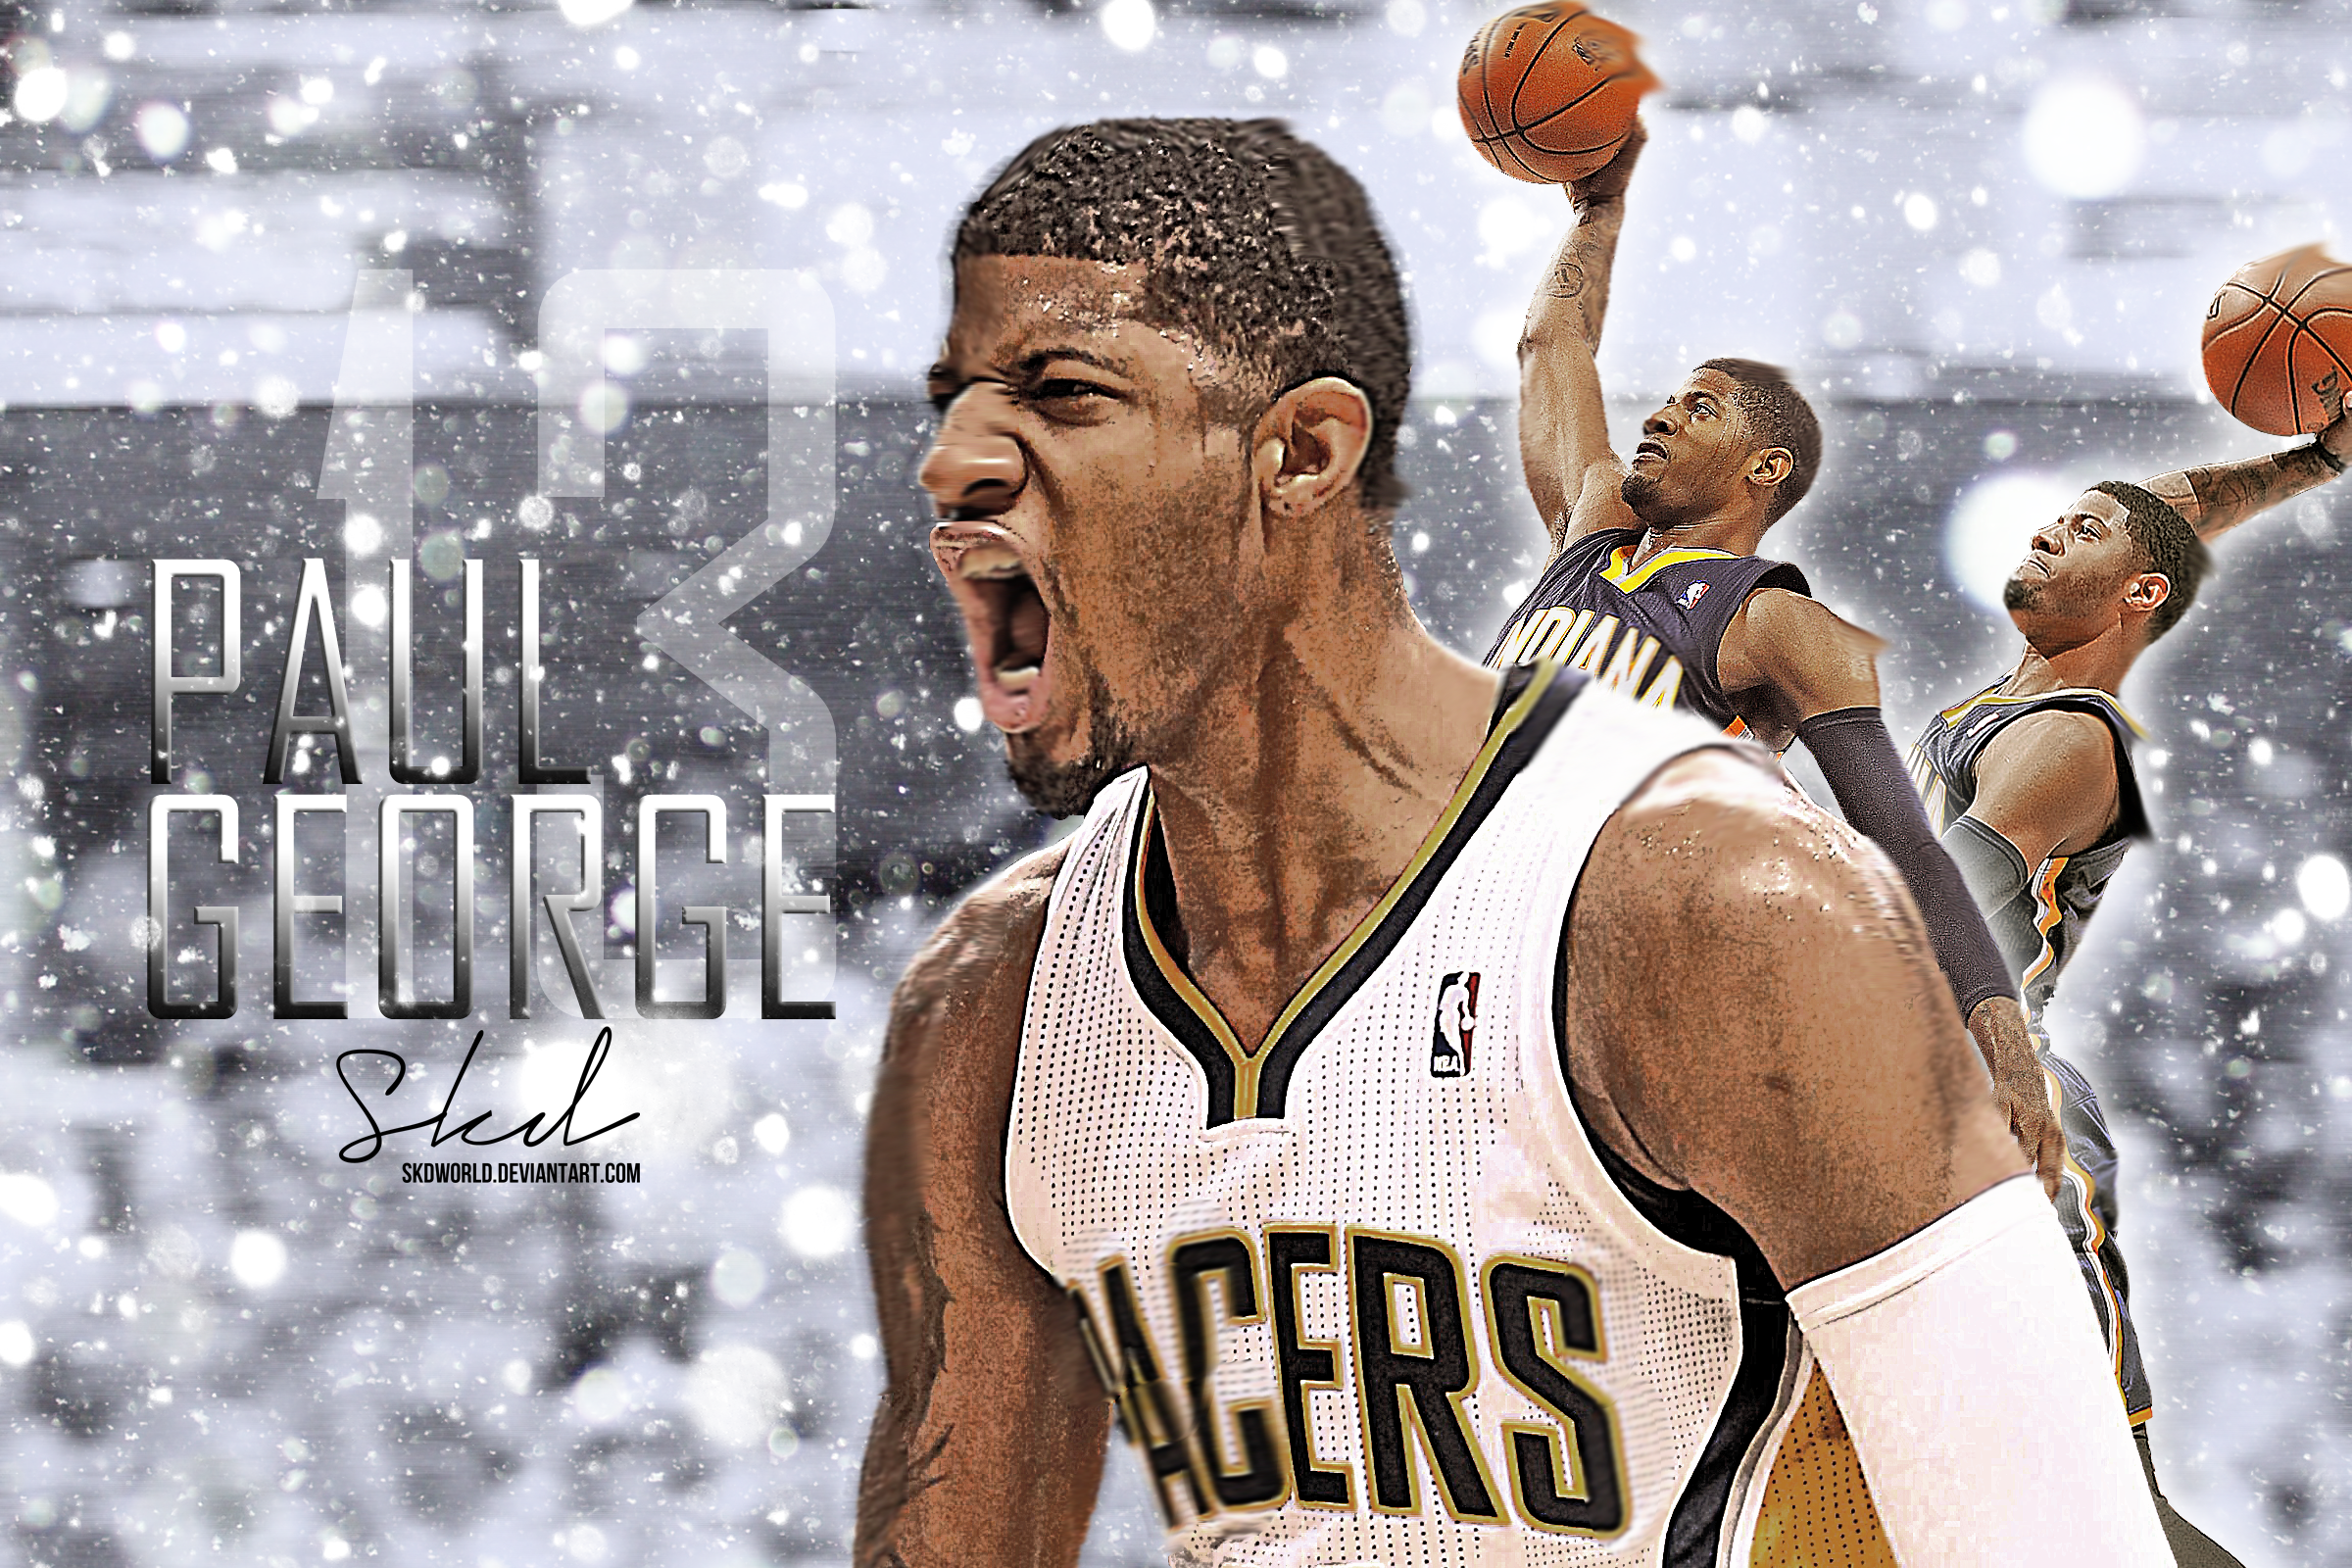 Paul George Number 13 by SkdWorld on